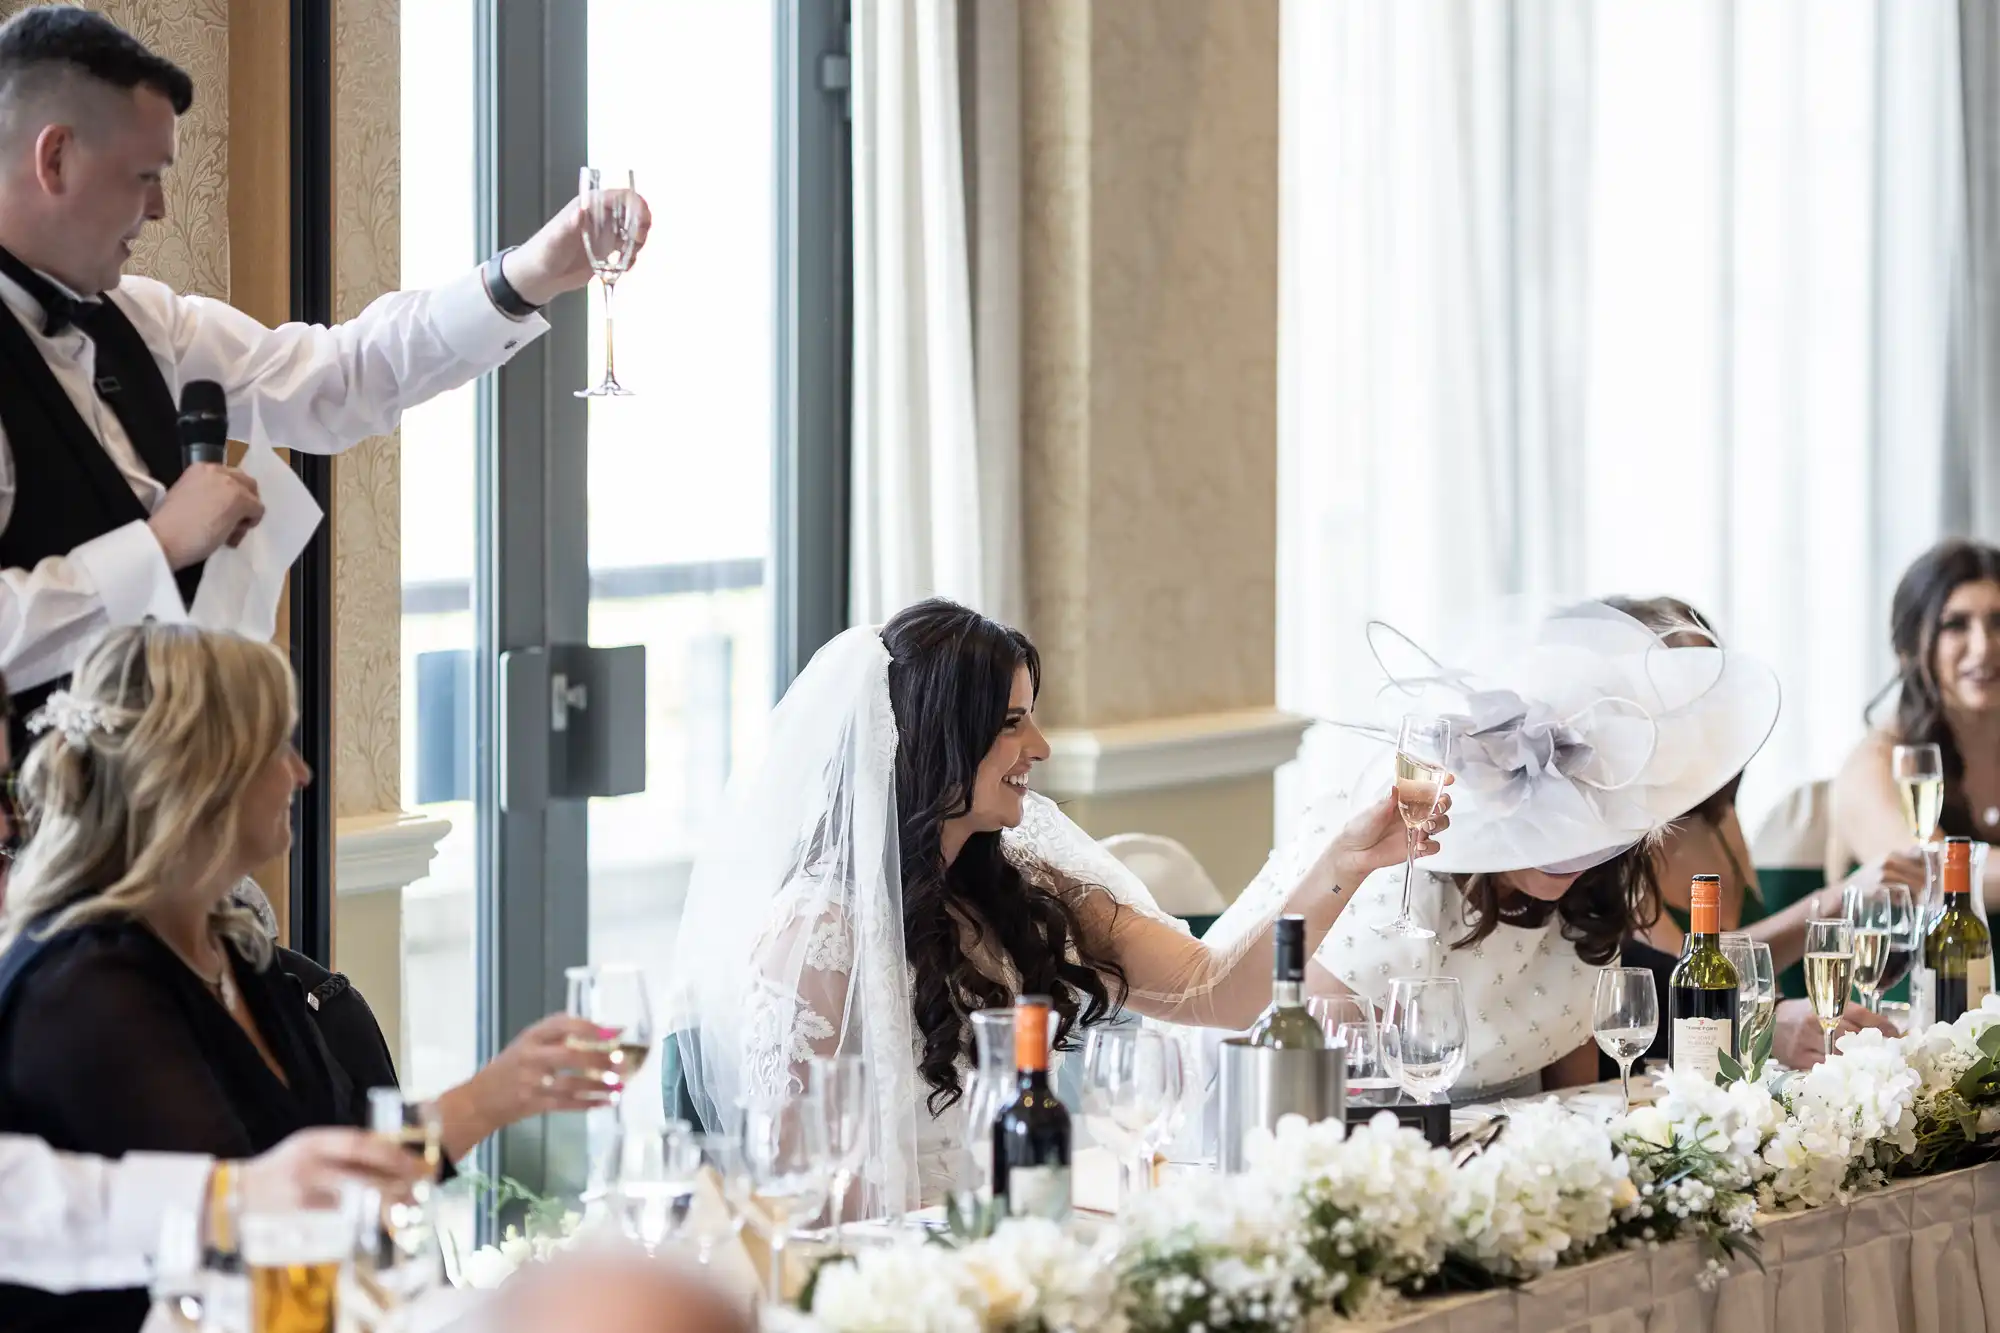 A bride in a white veil and another woman in a white hat clink glasses at a wedding reception, surrounded by guests and decor.